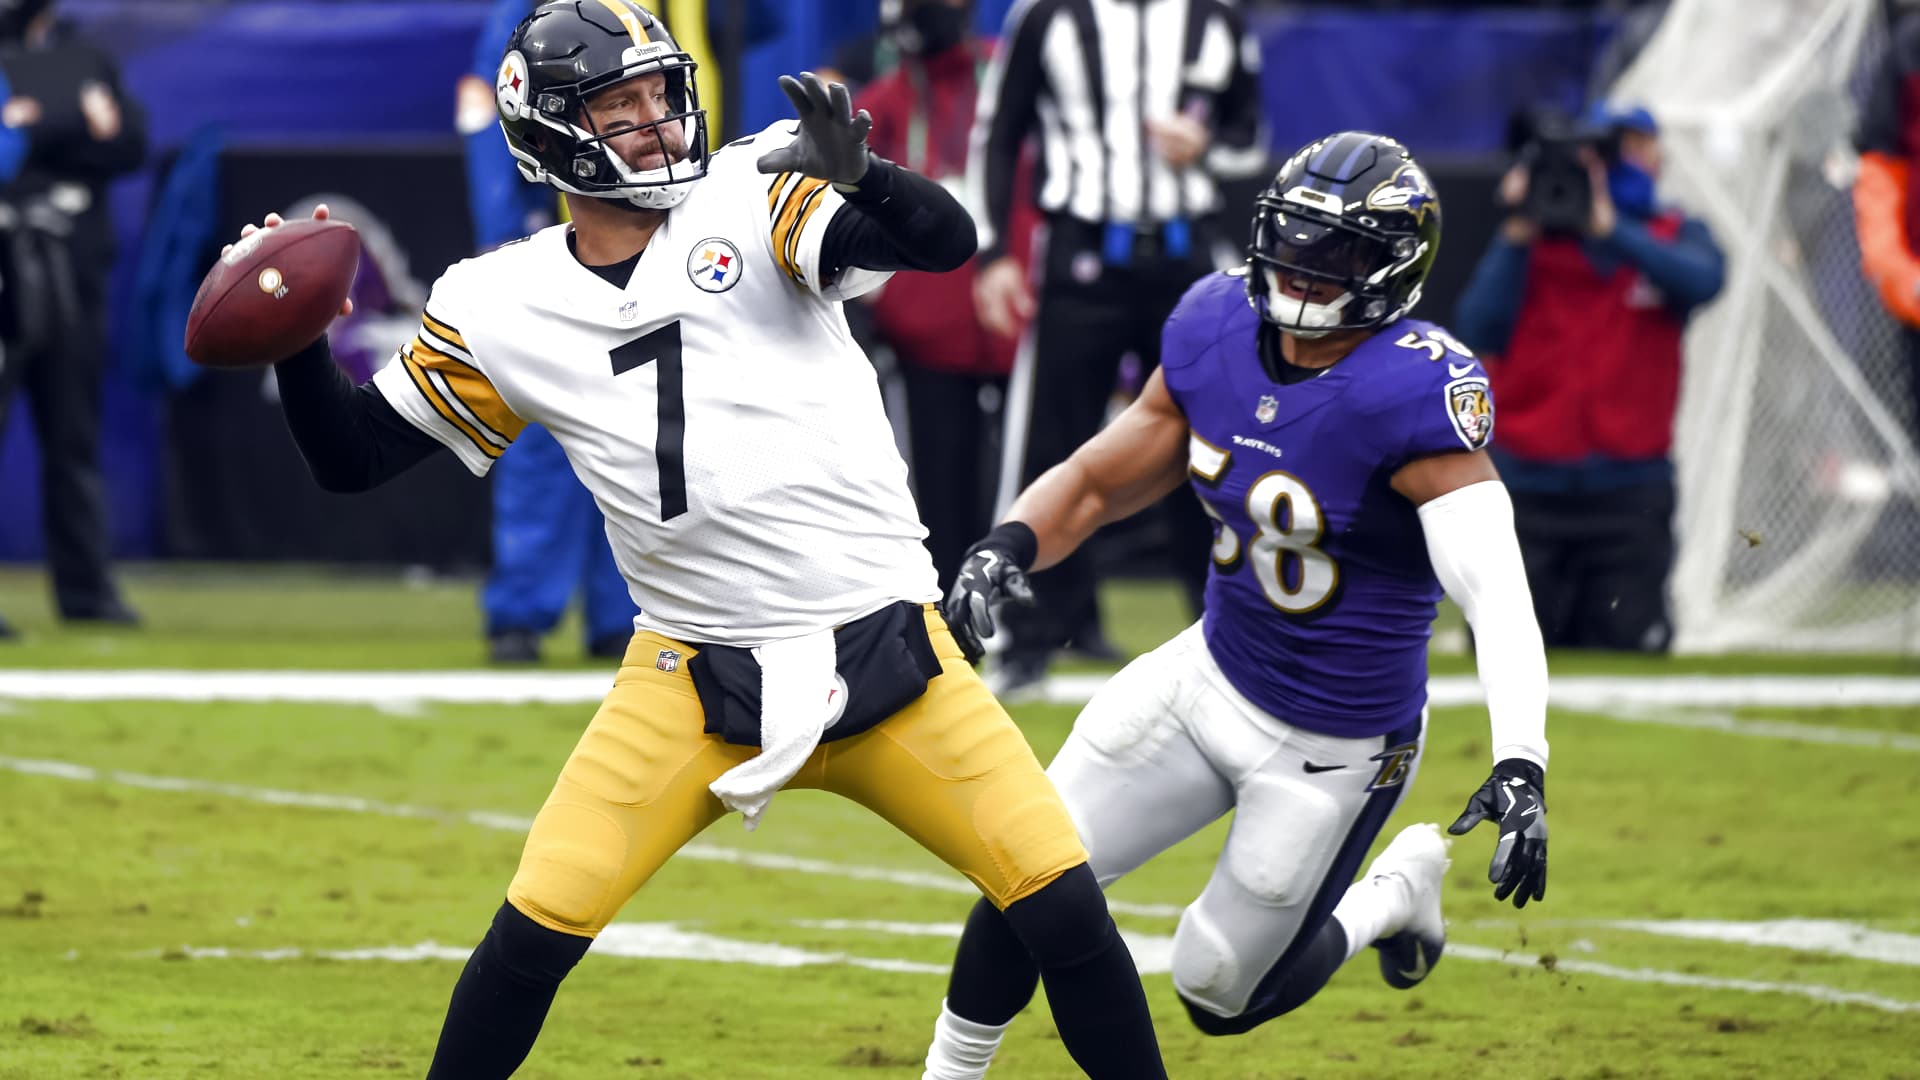 Pittsburgh Steelers quarterback Ben Roethlisberger (7) drops back to pass against the rush of Baltimore Ravens linebacker L.J. Fort (58) during the Pittsburgh Steelers game versus the Baltimore Ravens on November 1, 2020 at M&T Bank Stadium in Baltimore, MD.